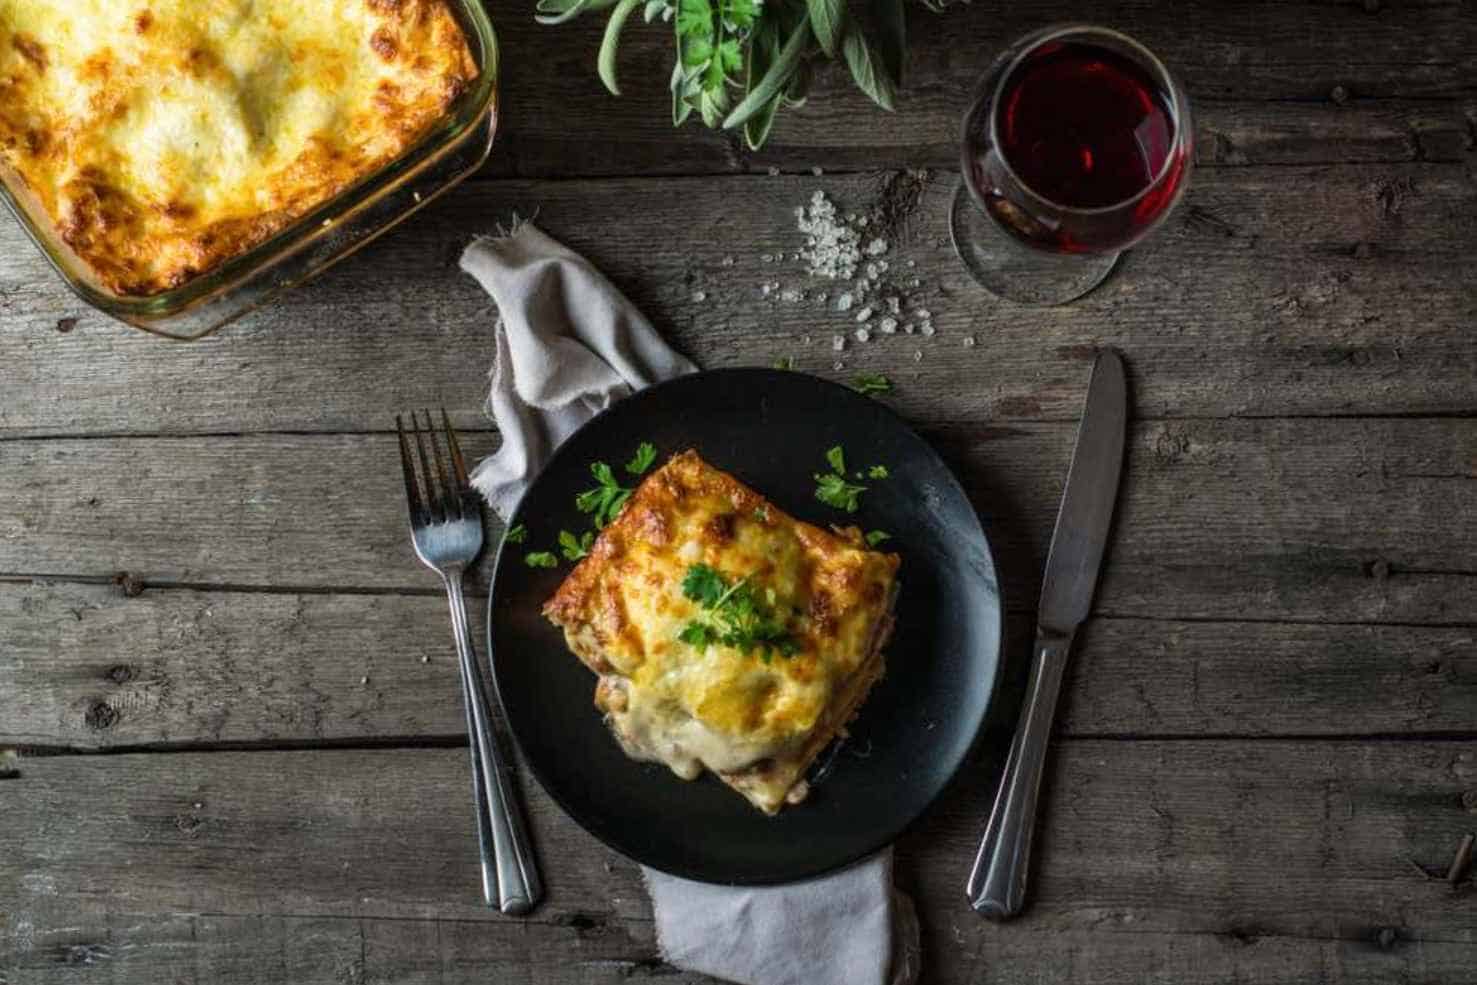 Best Wines Goes With Lasagna